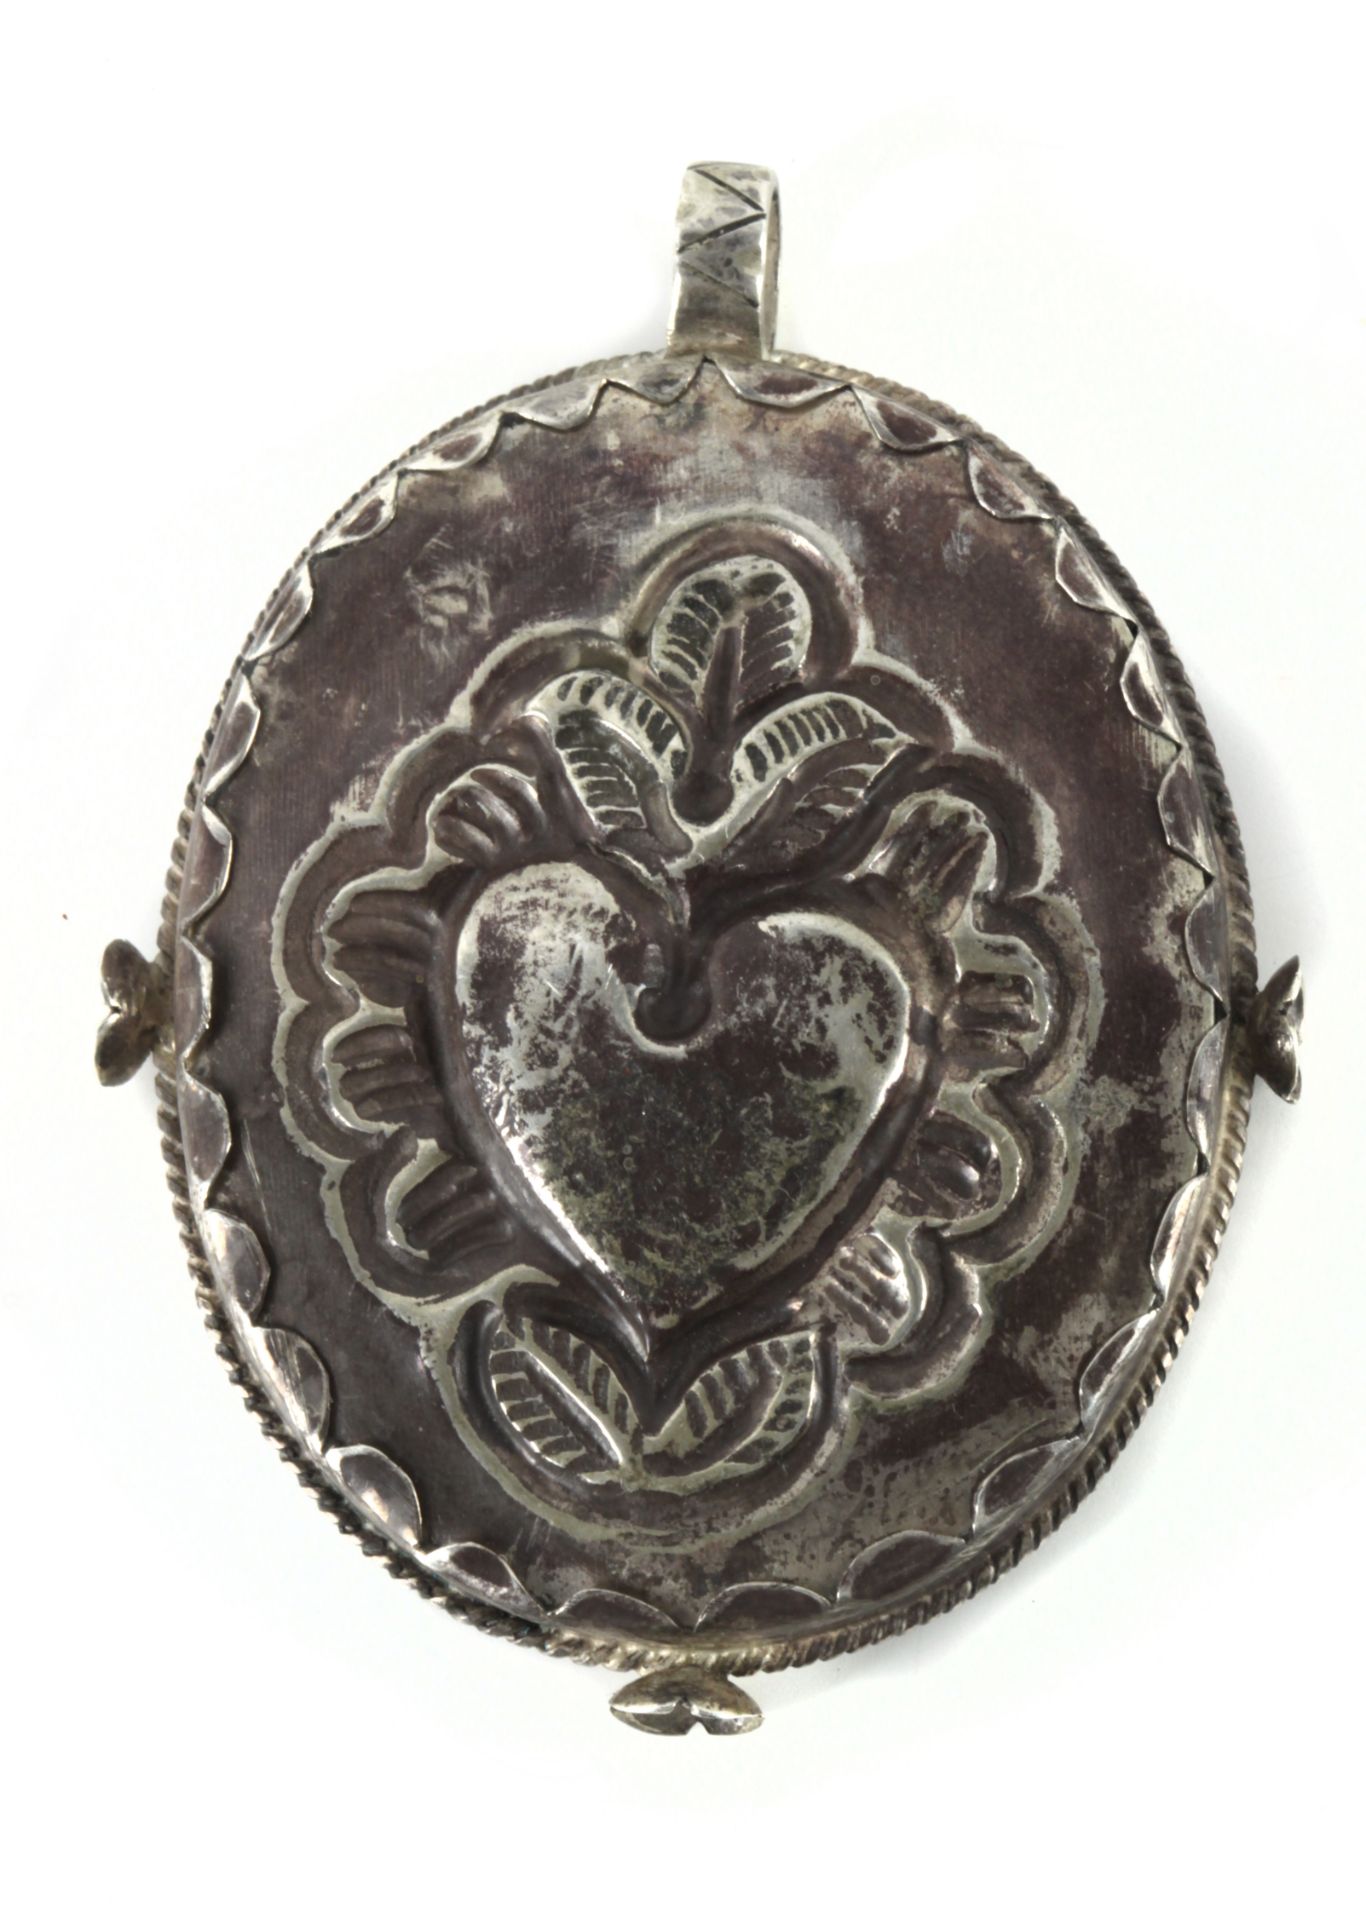 A 19th century colonial reliquary pendant in Mexican silver - Image 2 of 2